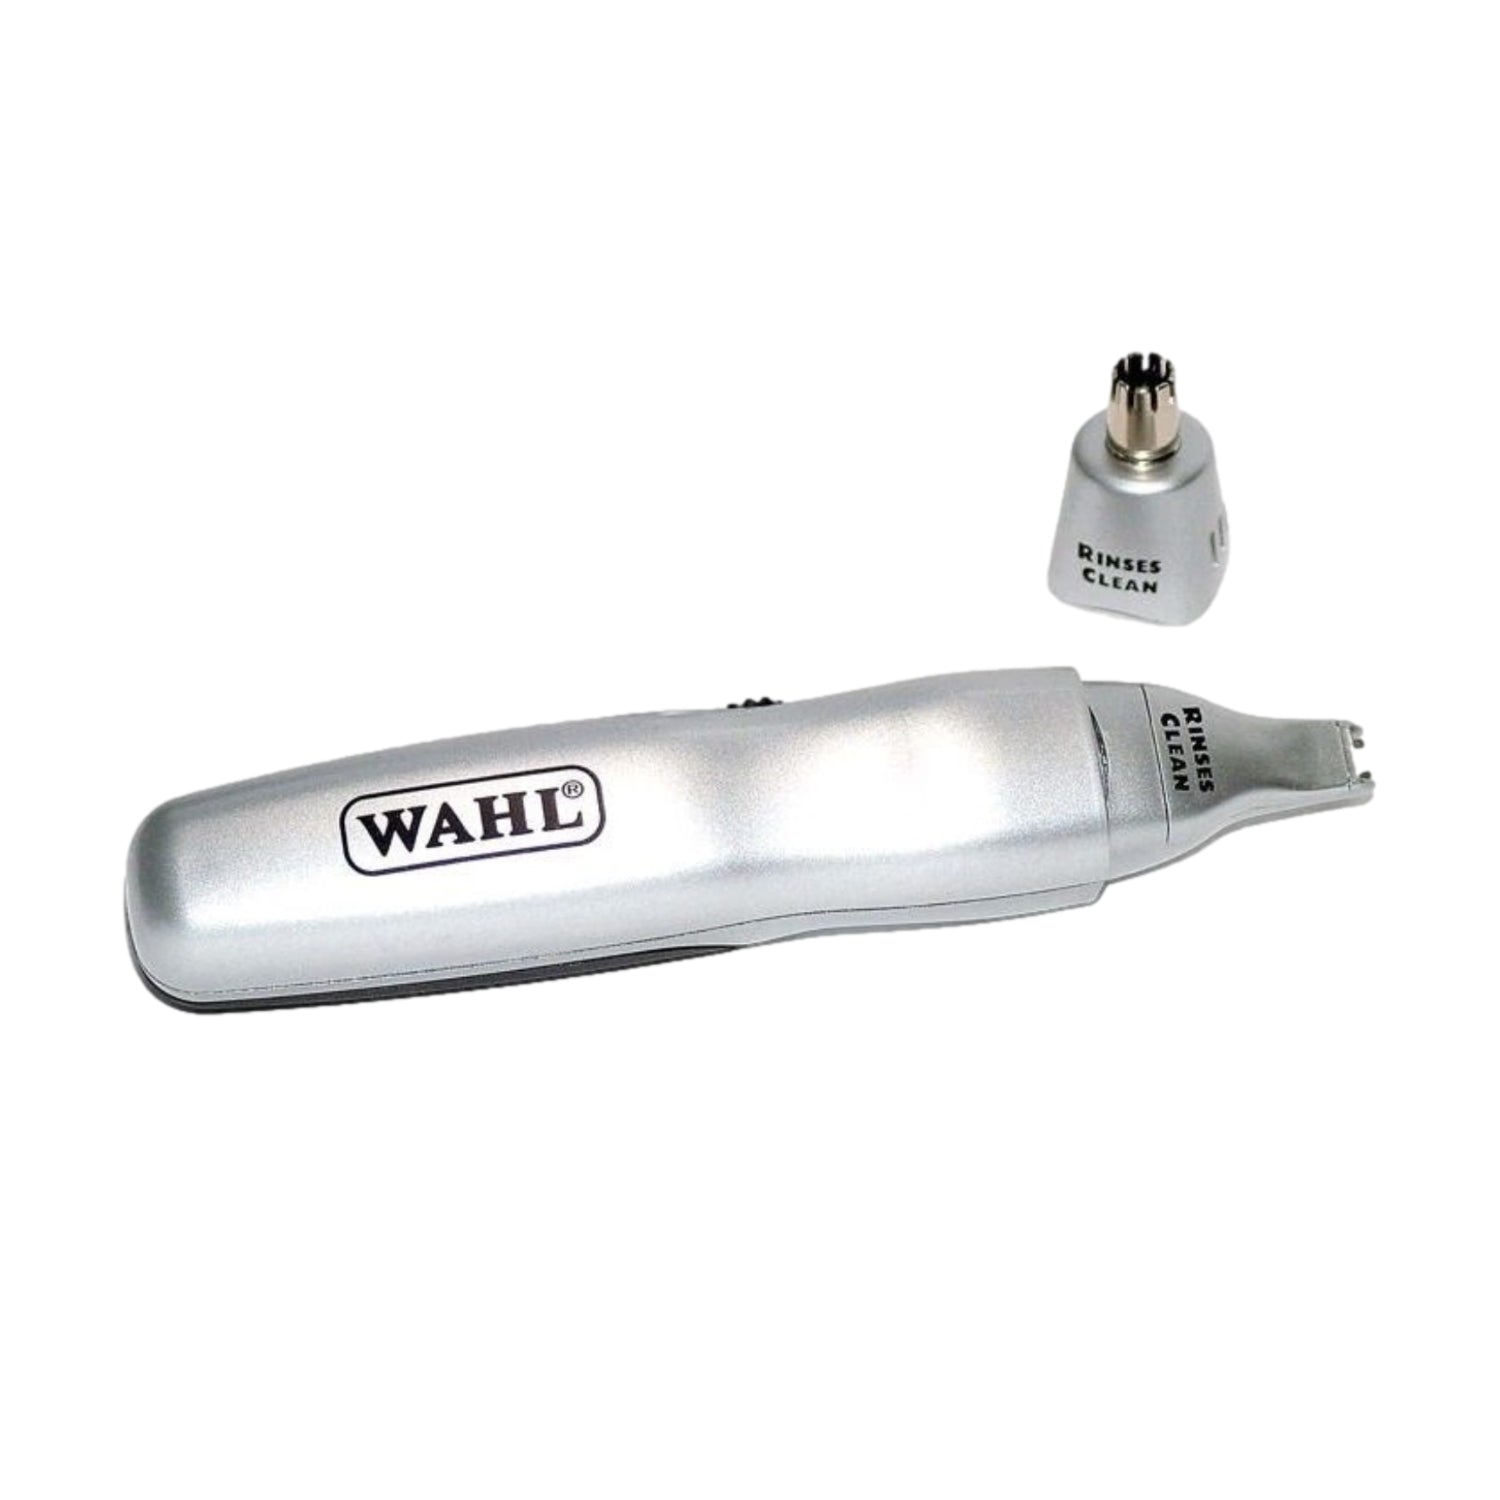 Wahl Personal Trimmer Kit Dual Trimming Heads Battery Operated